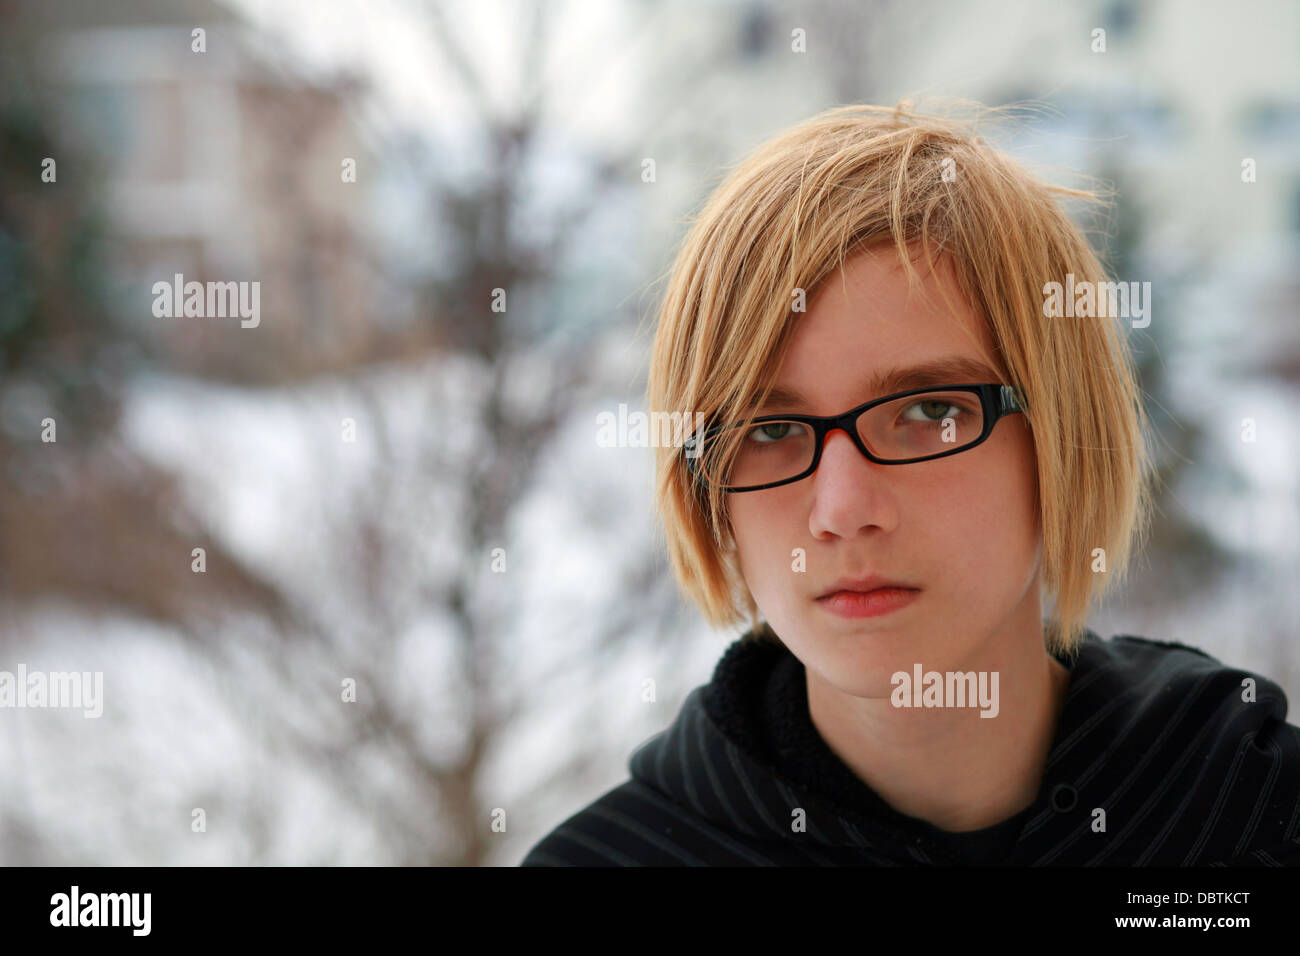 Closeup Of Sad Teen Boy With Blonde Hair And Glasses Stock Photo